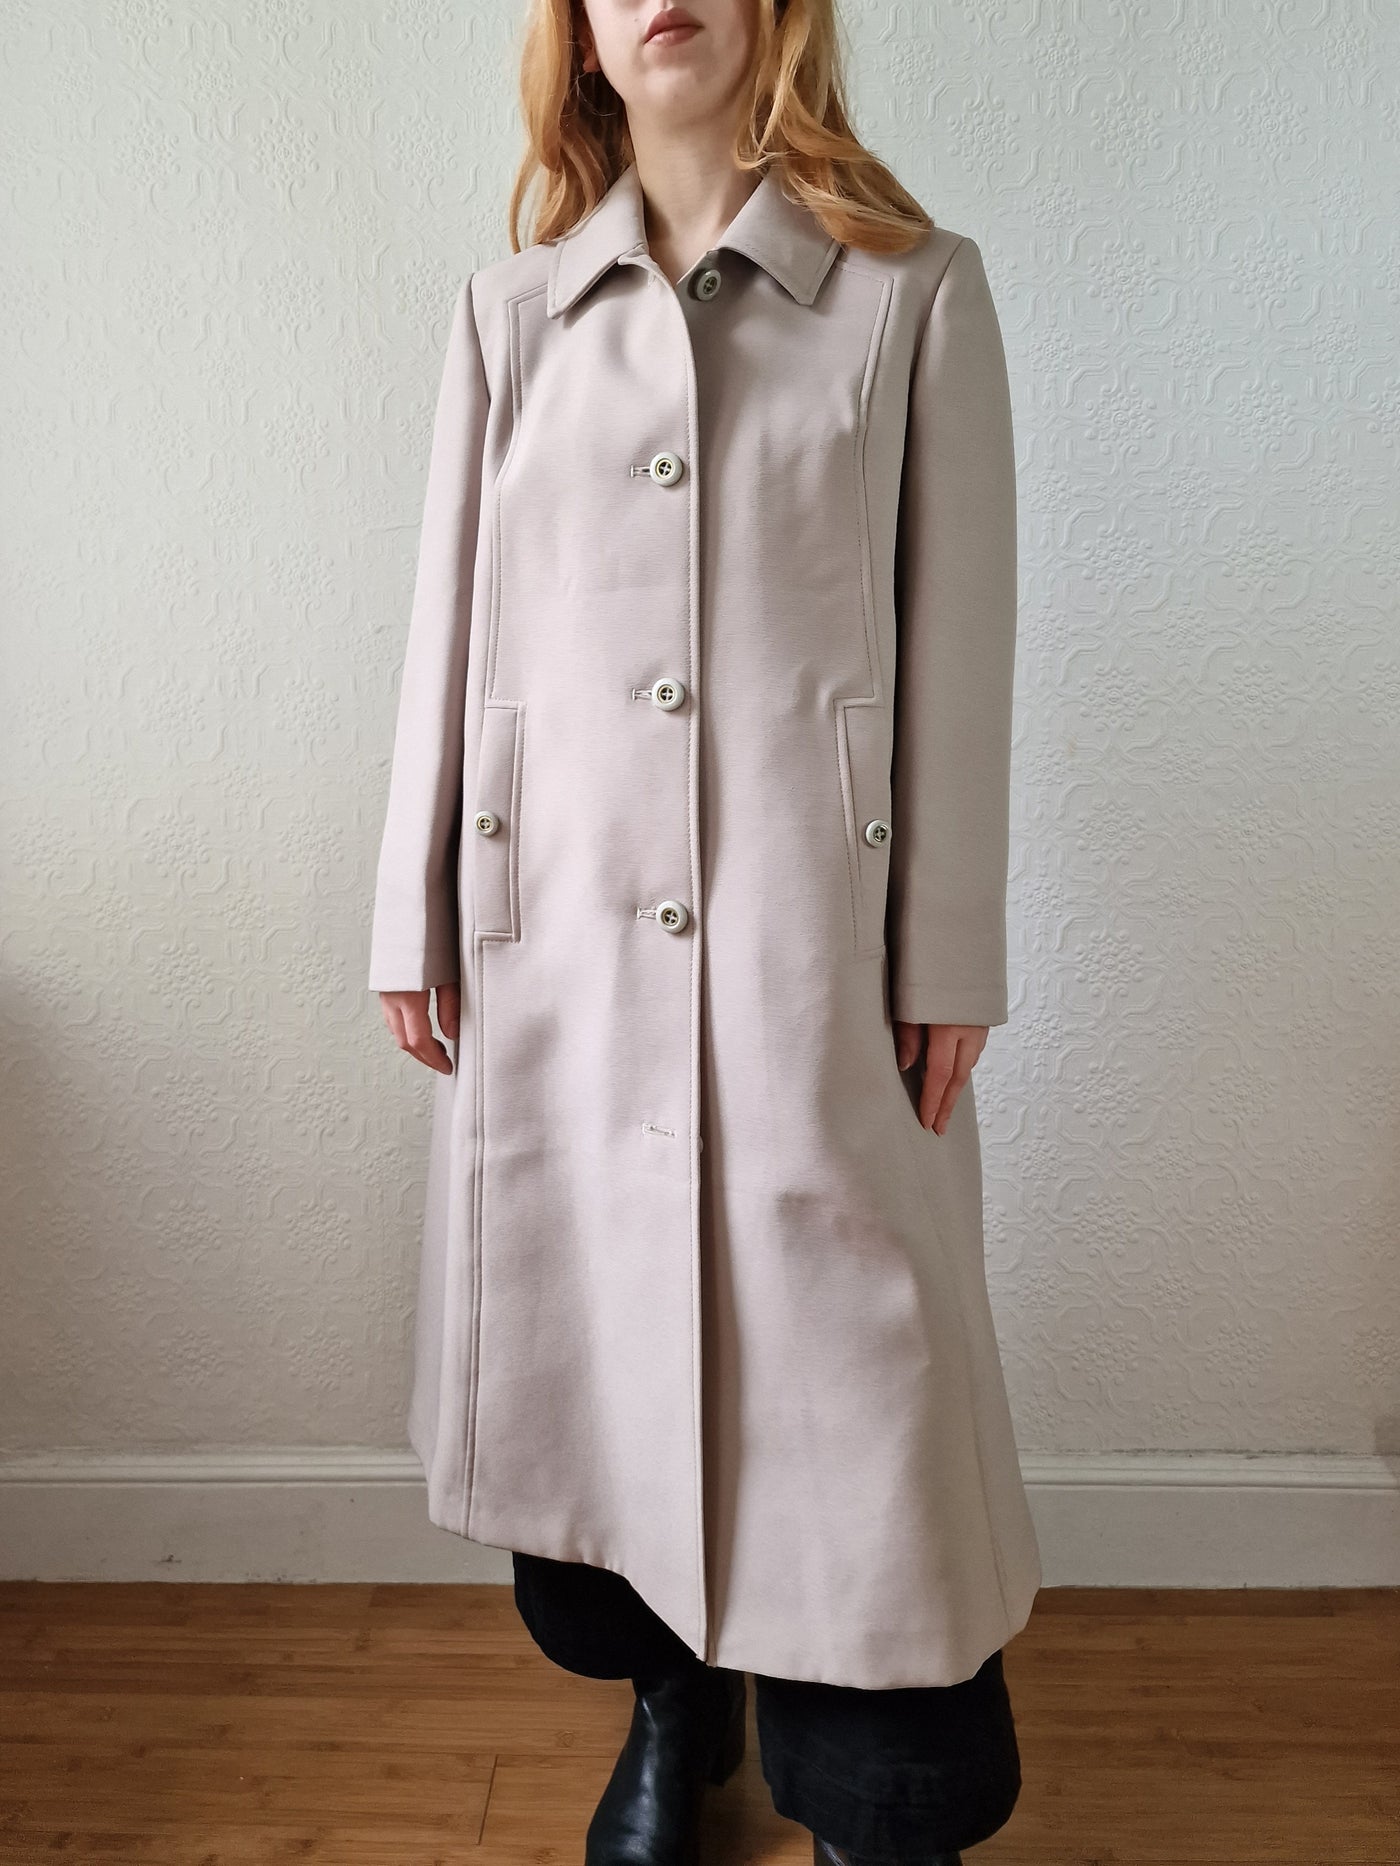 Vintage Light Beige Single Breasted Trench Coat - S/M